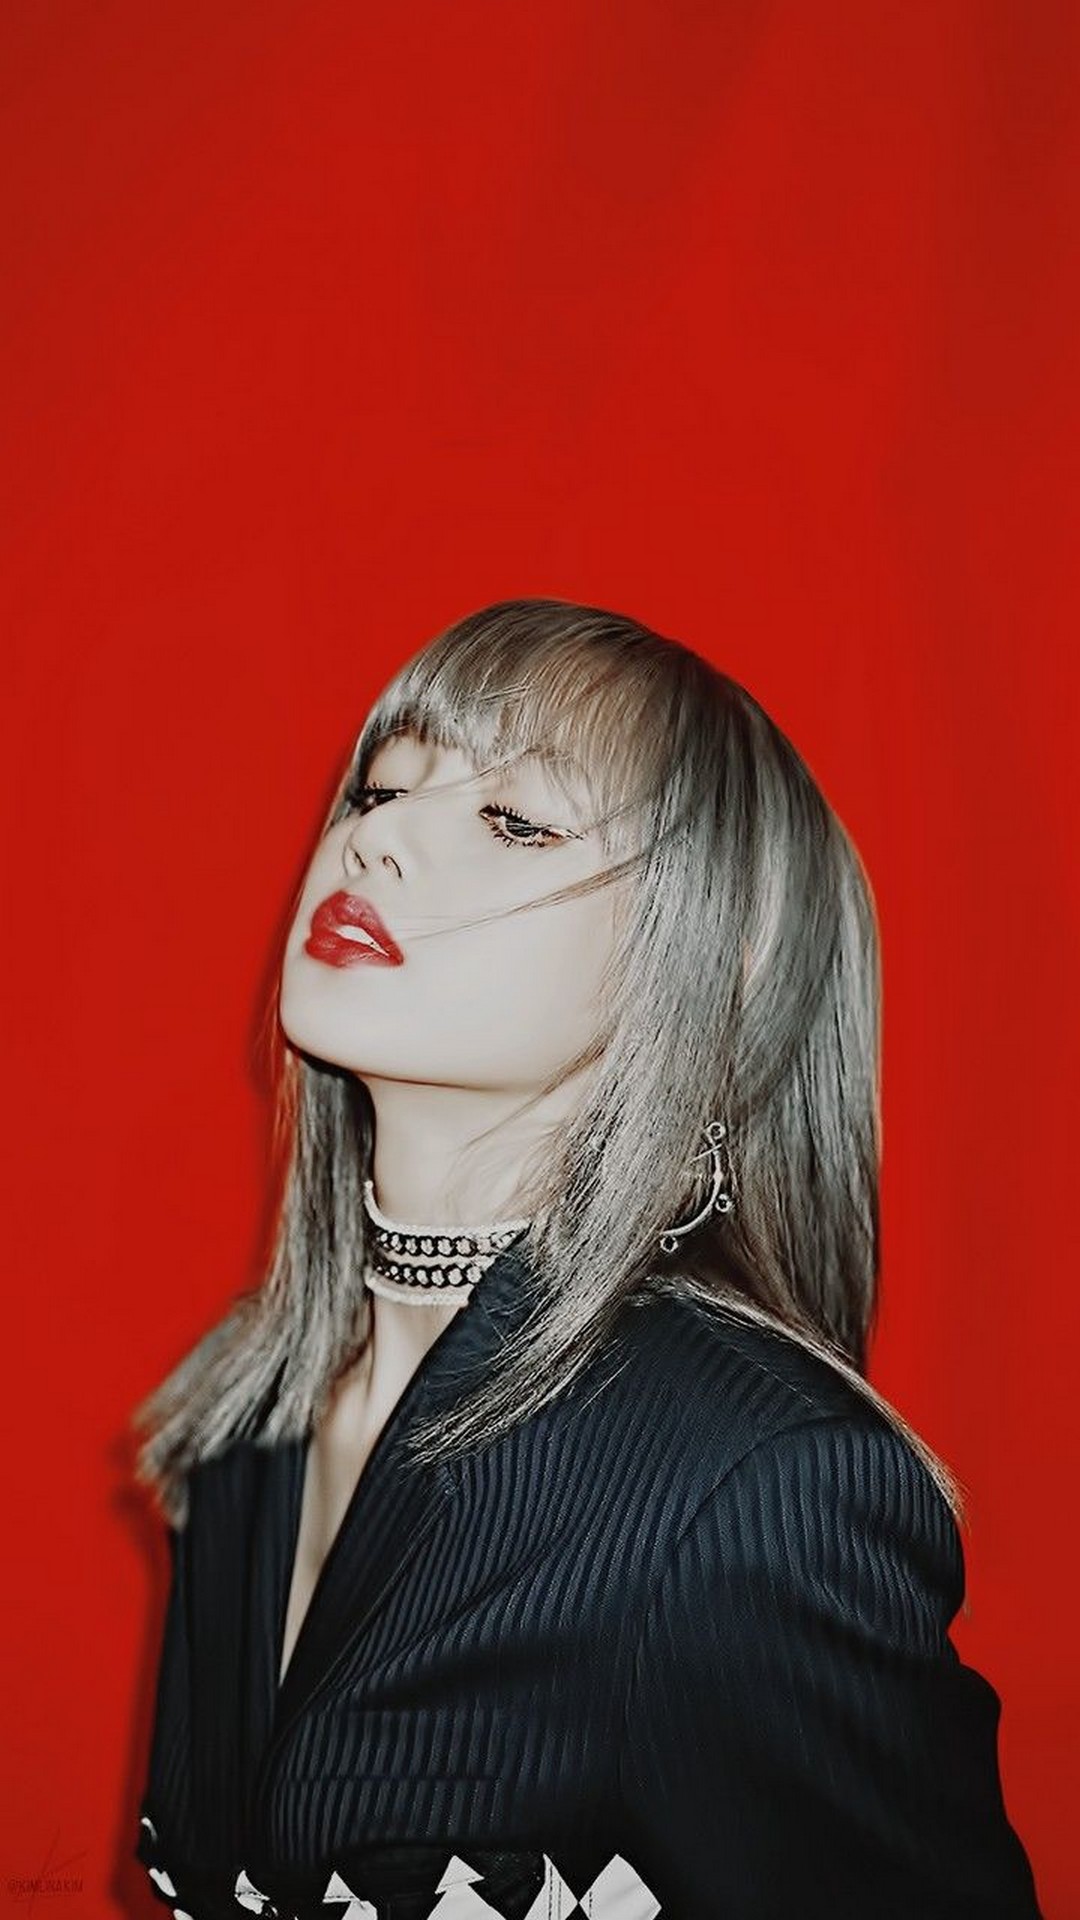 Lisa Blackpink Wallpaper for Phones with high-resolution 1080x1920 pixel. Download all Mobile Wallpapers and Use them as wallpapers for your iPhone, Tablet, iPad, Android and other mobile devices